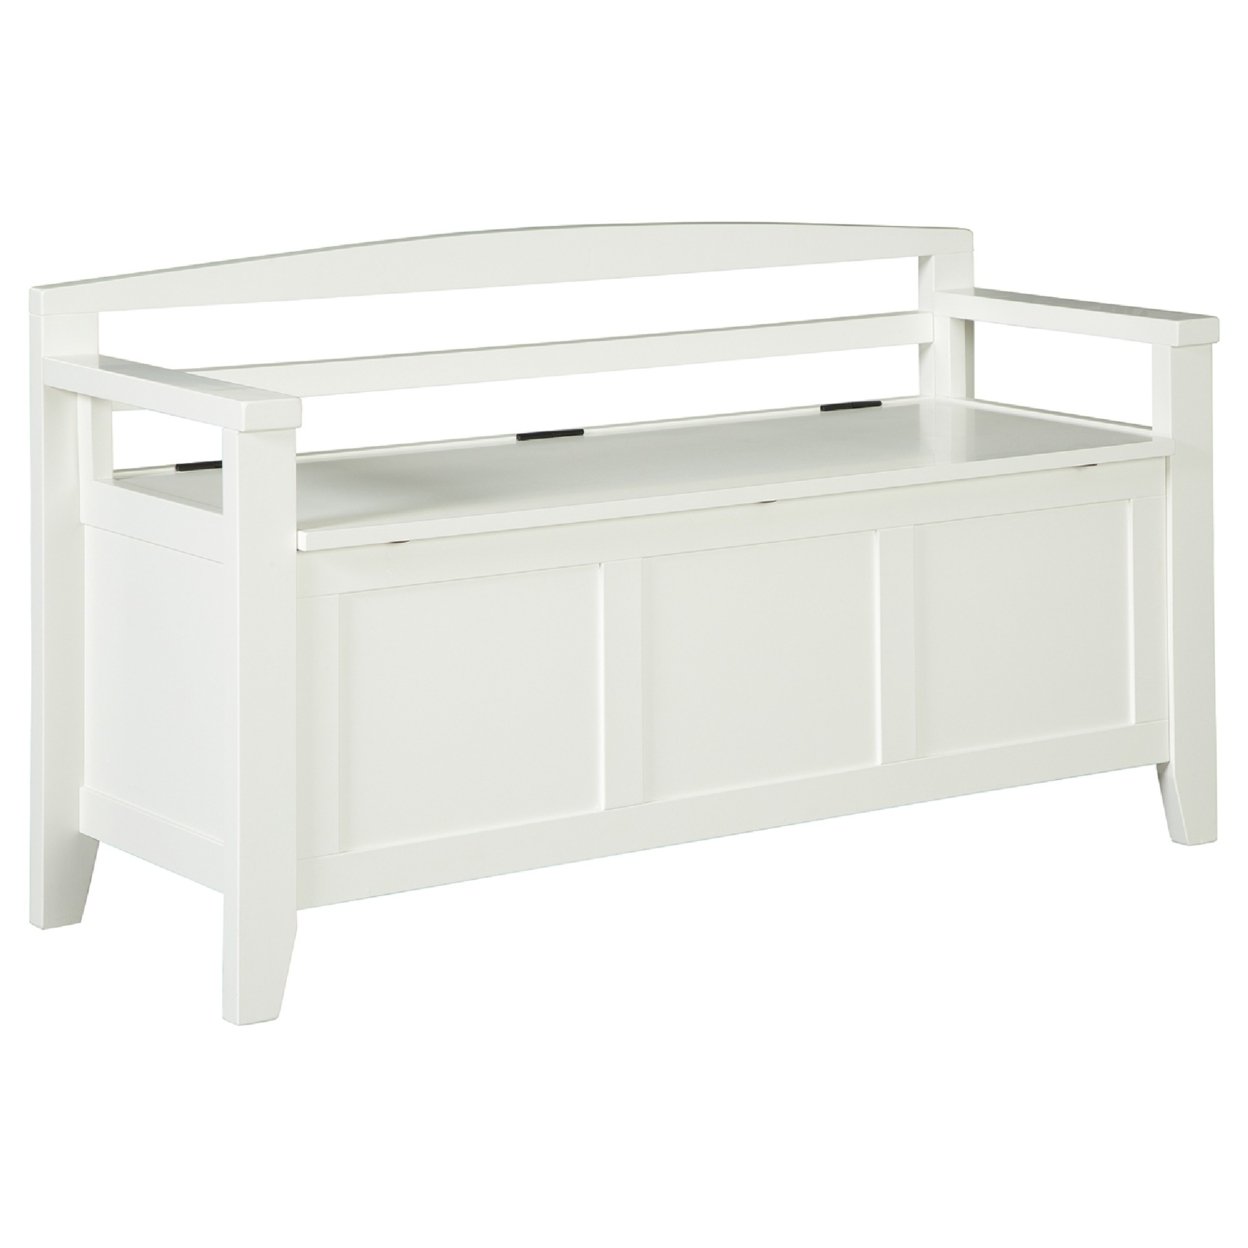 Saltoro Sherpi Transitional Style Wooden Bench with Lift Top Seat, White